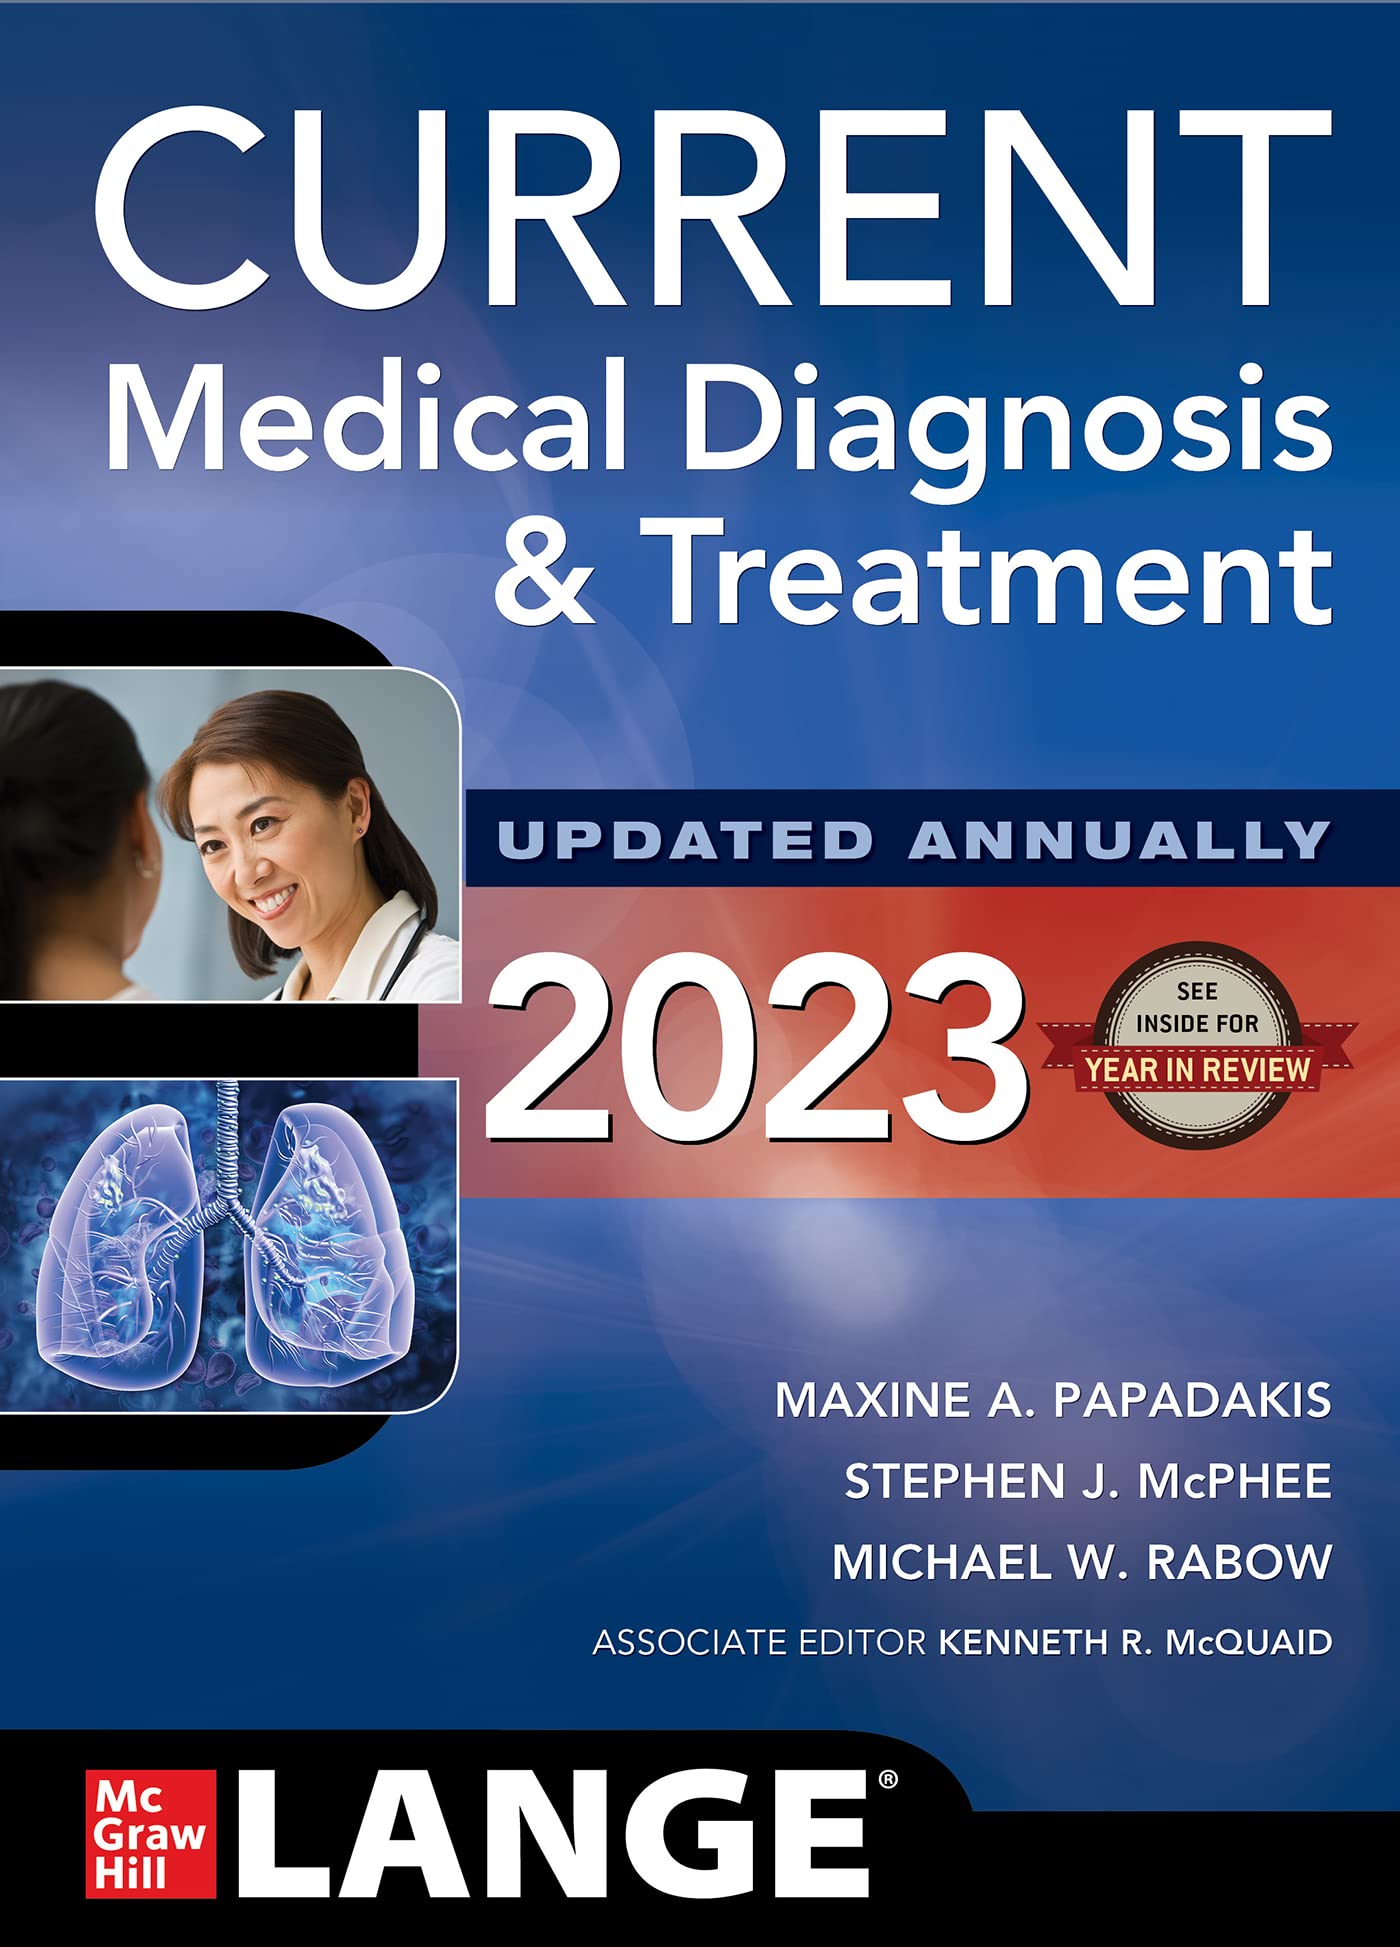 Current Medical Diagnosis and Treatment 2023 by Maxine A. Papadakis